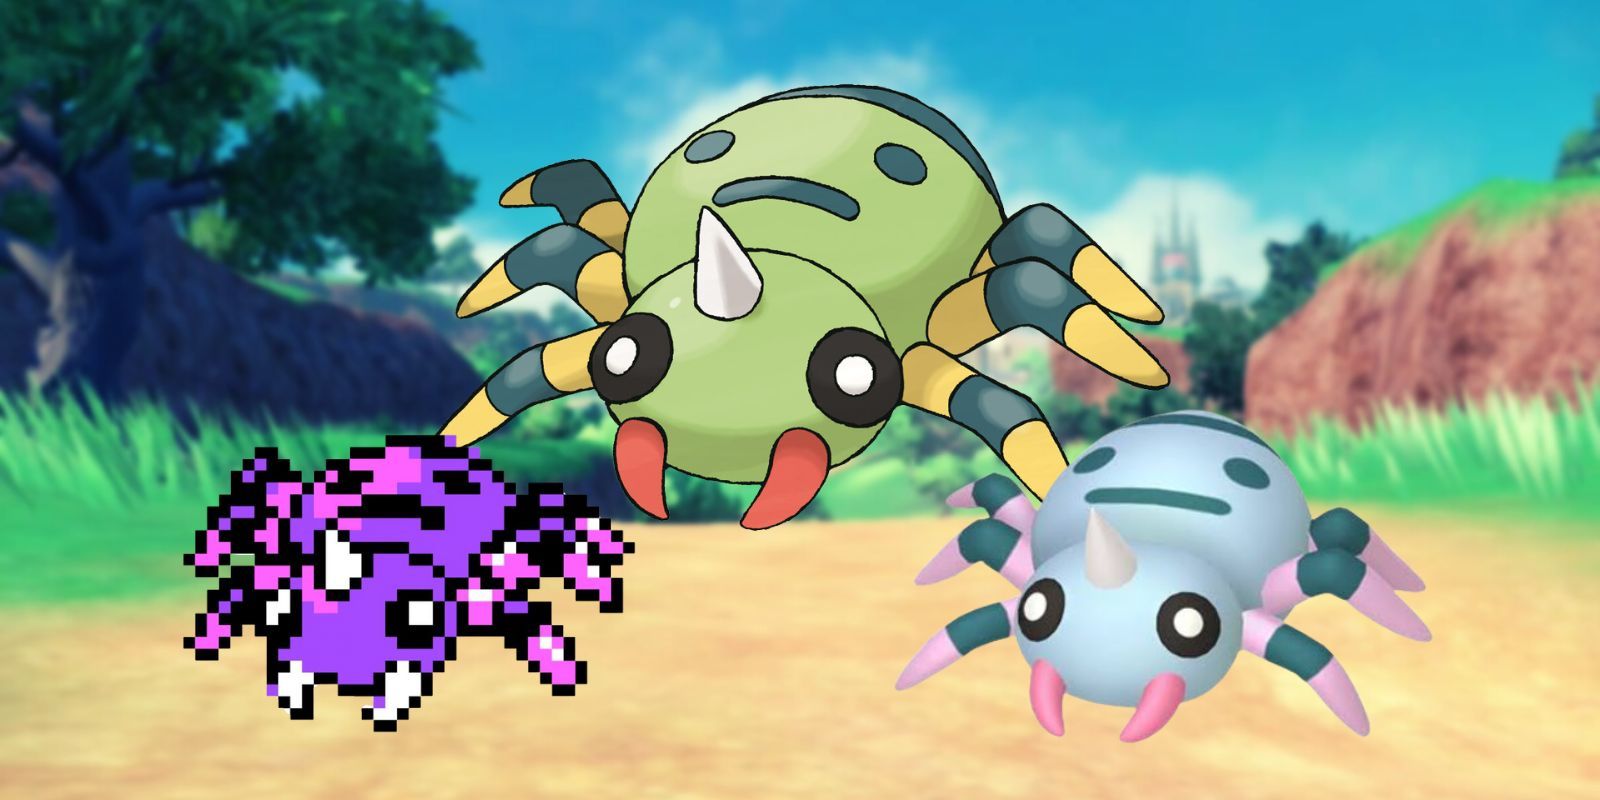 Spinarak normal form with a Gen 2 shiny and a current shiny version